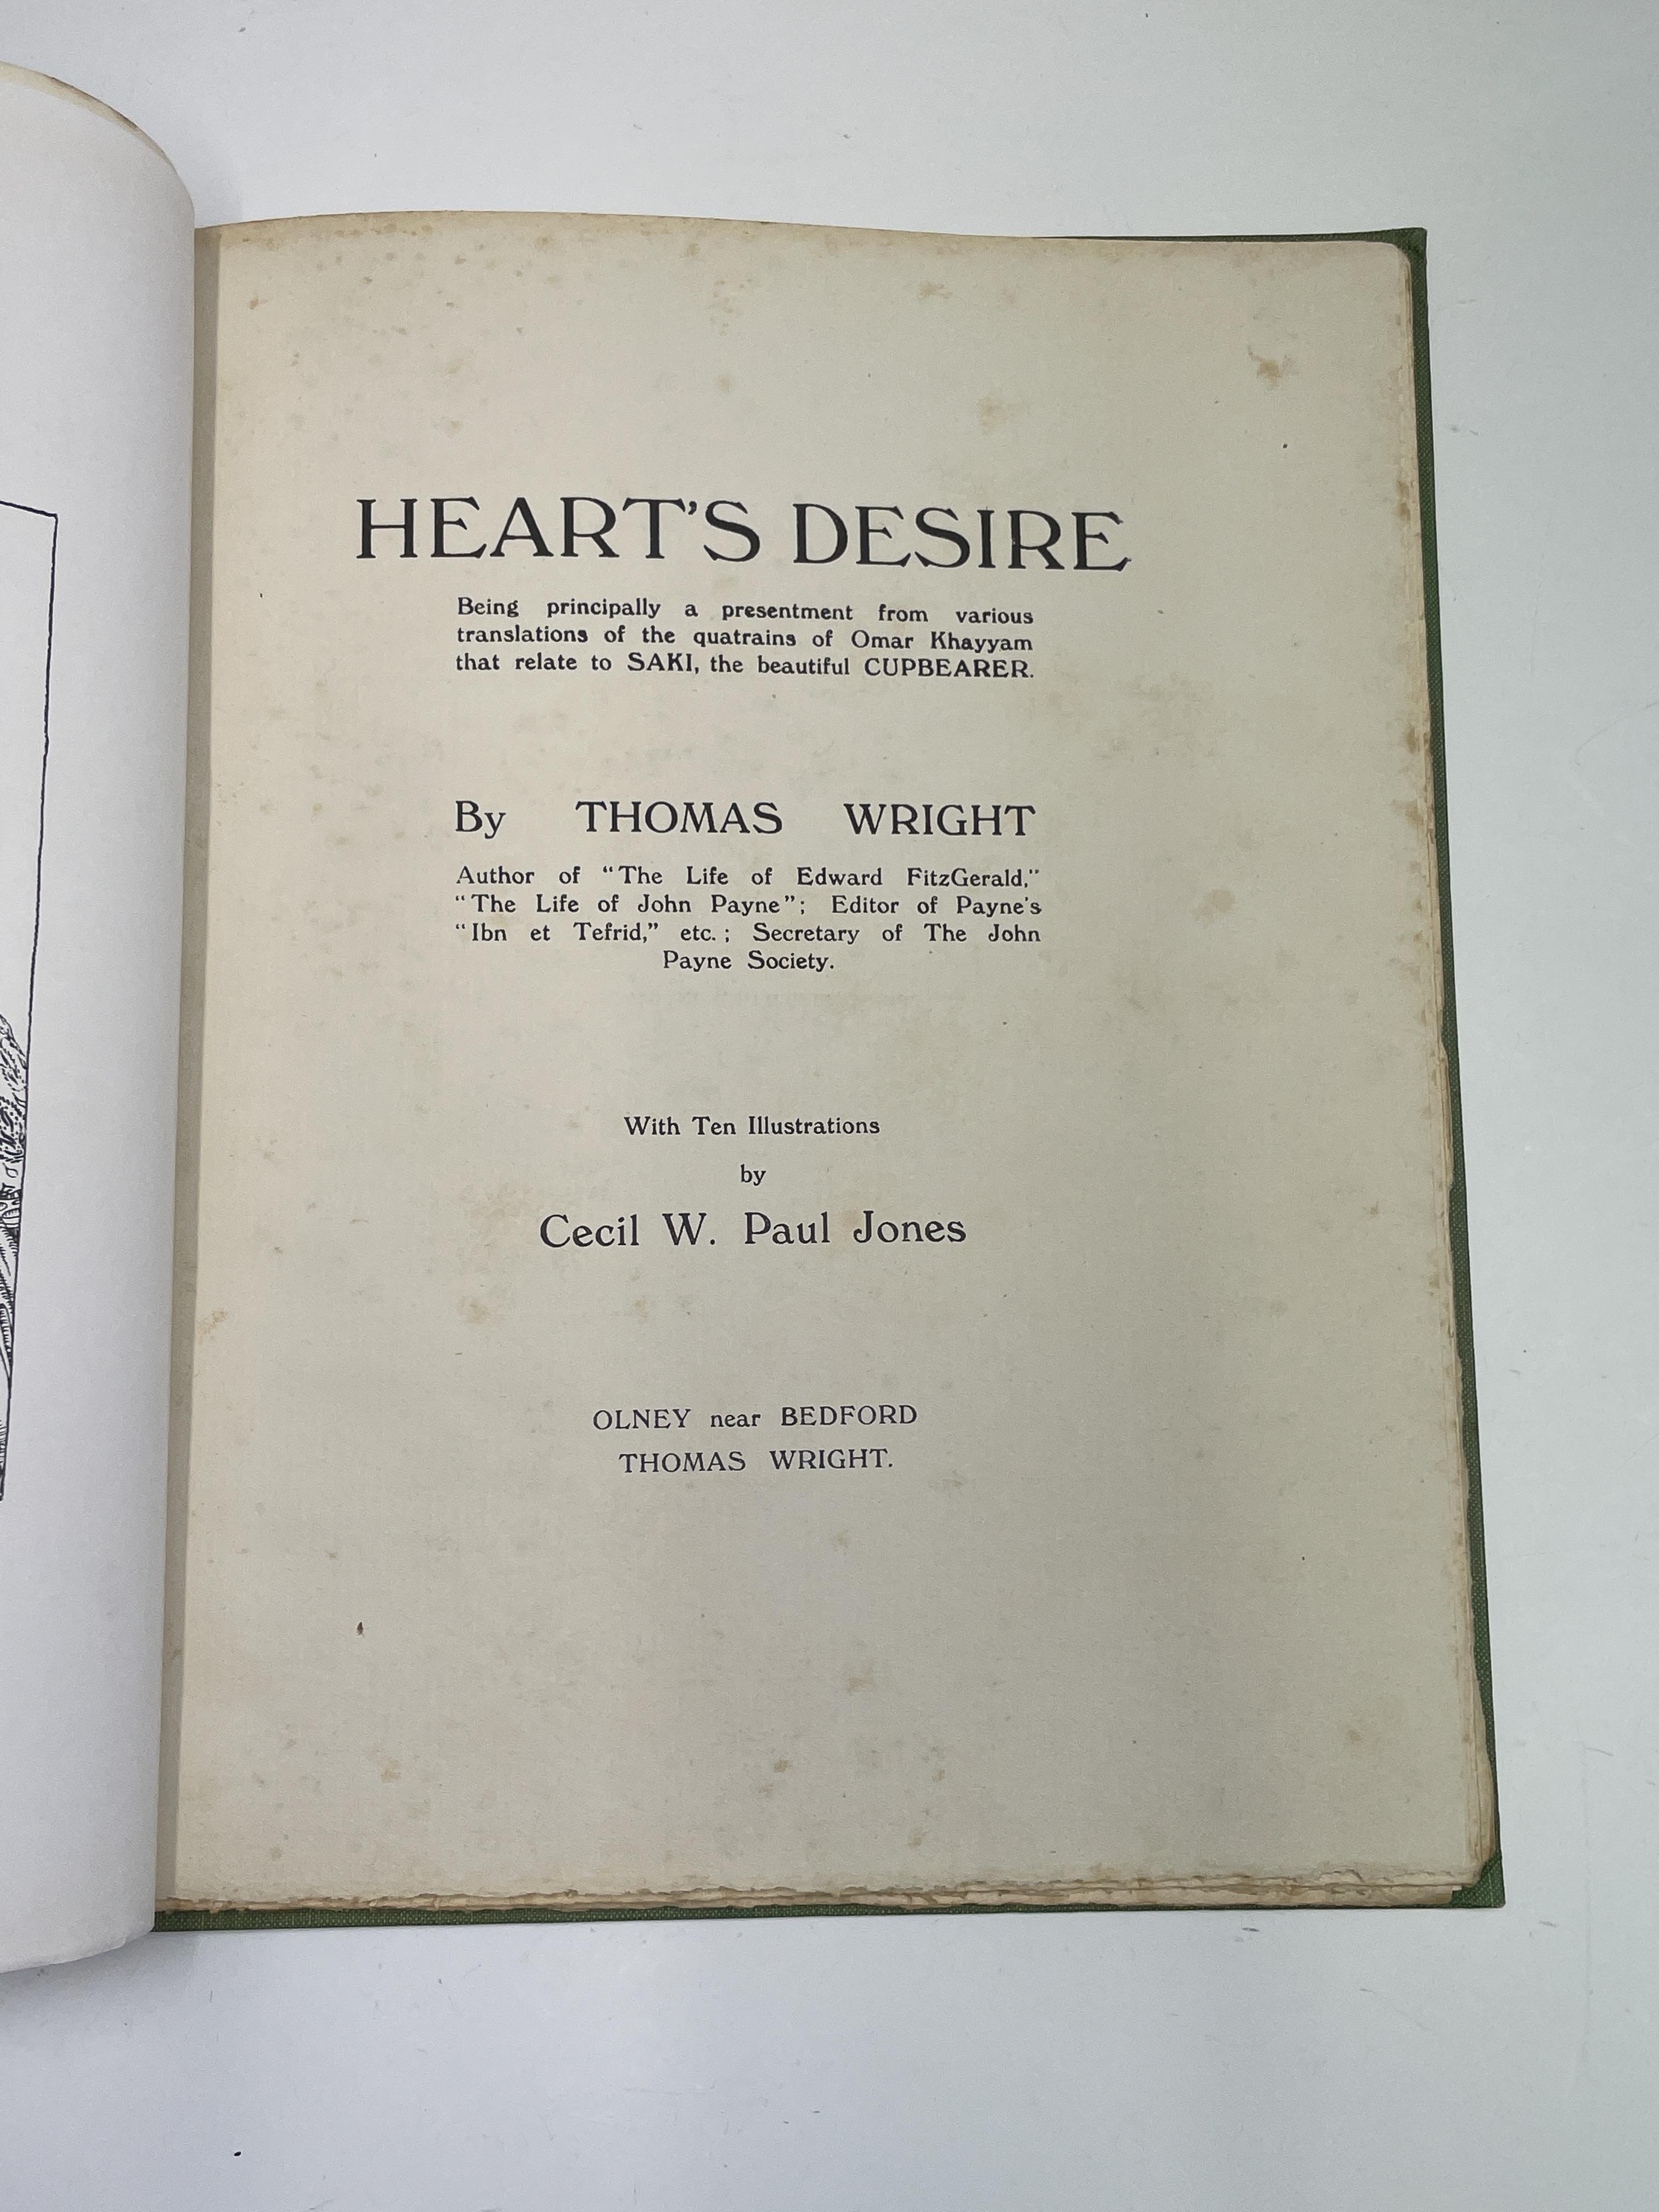 THOMAS WRIGHT. 'Heart's Desire, Being principally a presentment from various translations of the - Image 3 of 8